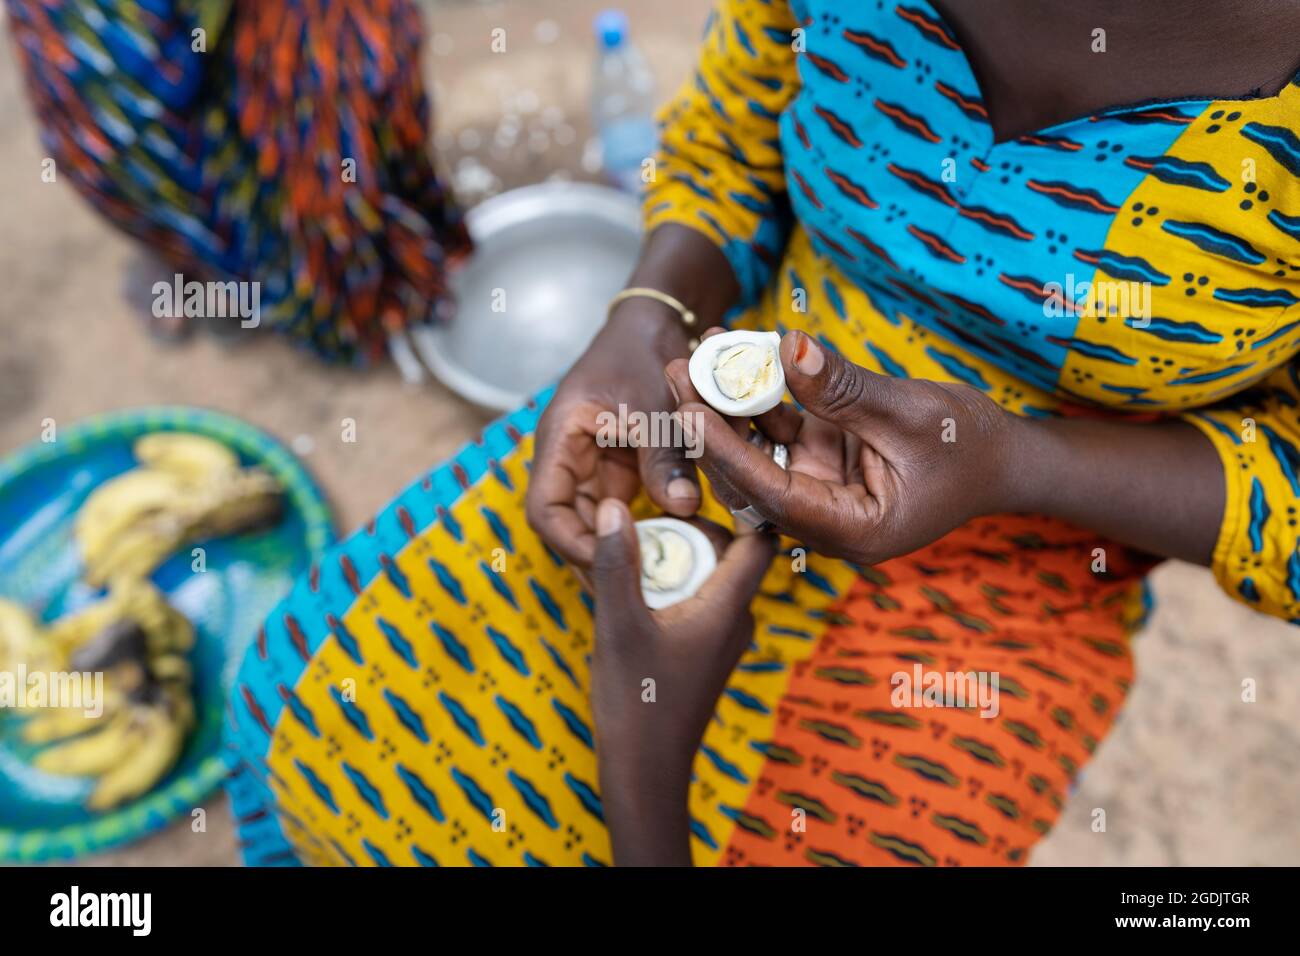 Caring African woman in a colorful dress sitting on the floor in a rural village kitchen, sharing half of an egg with a child; poverty concept Stock Photo